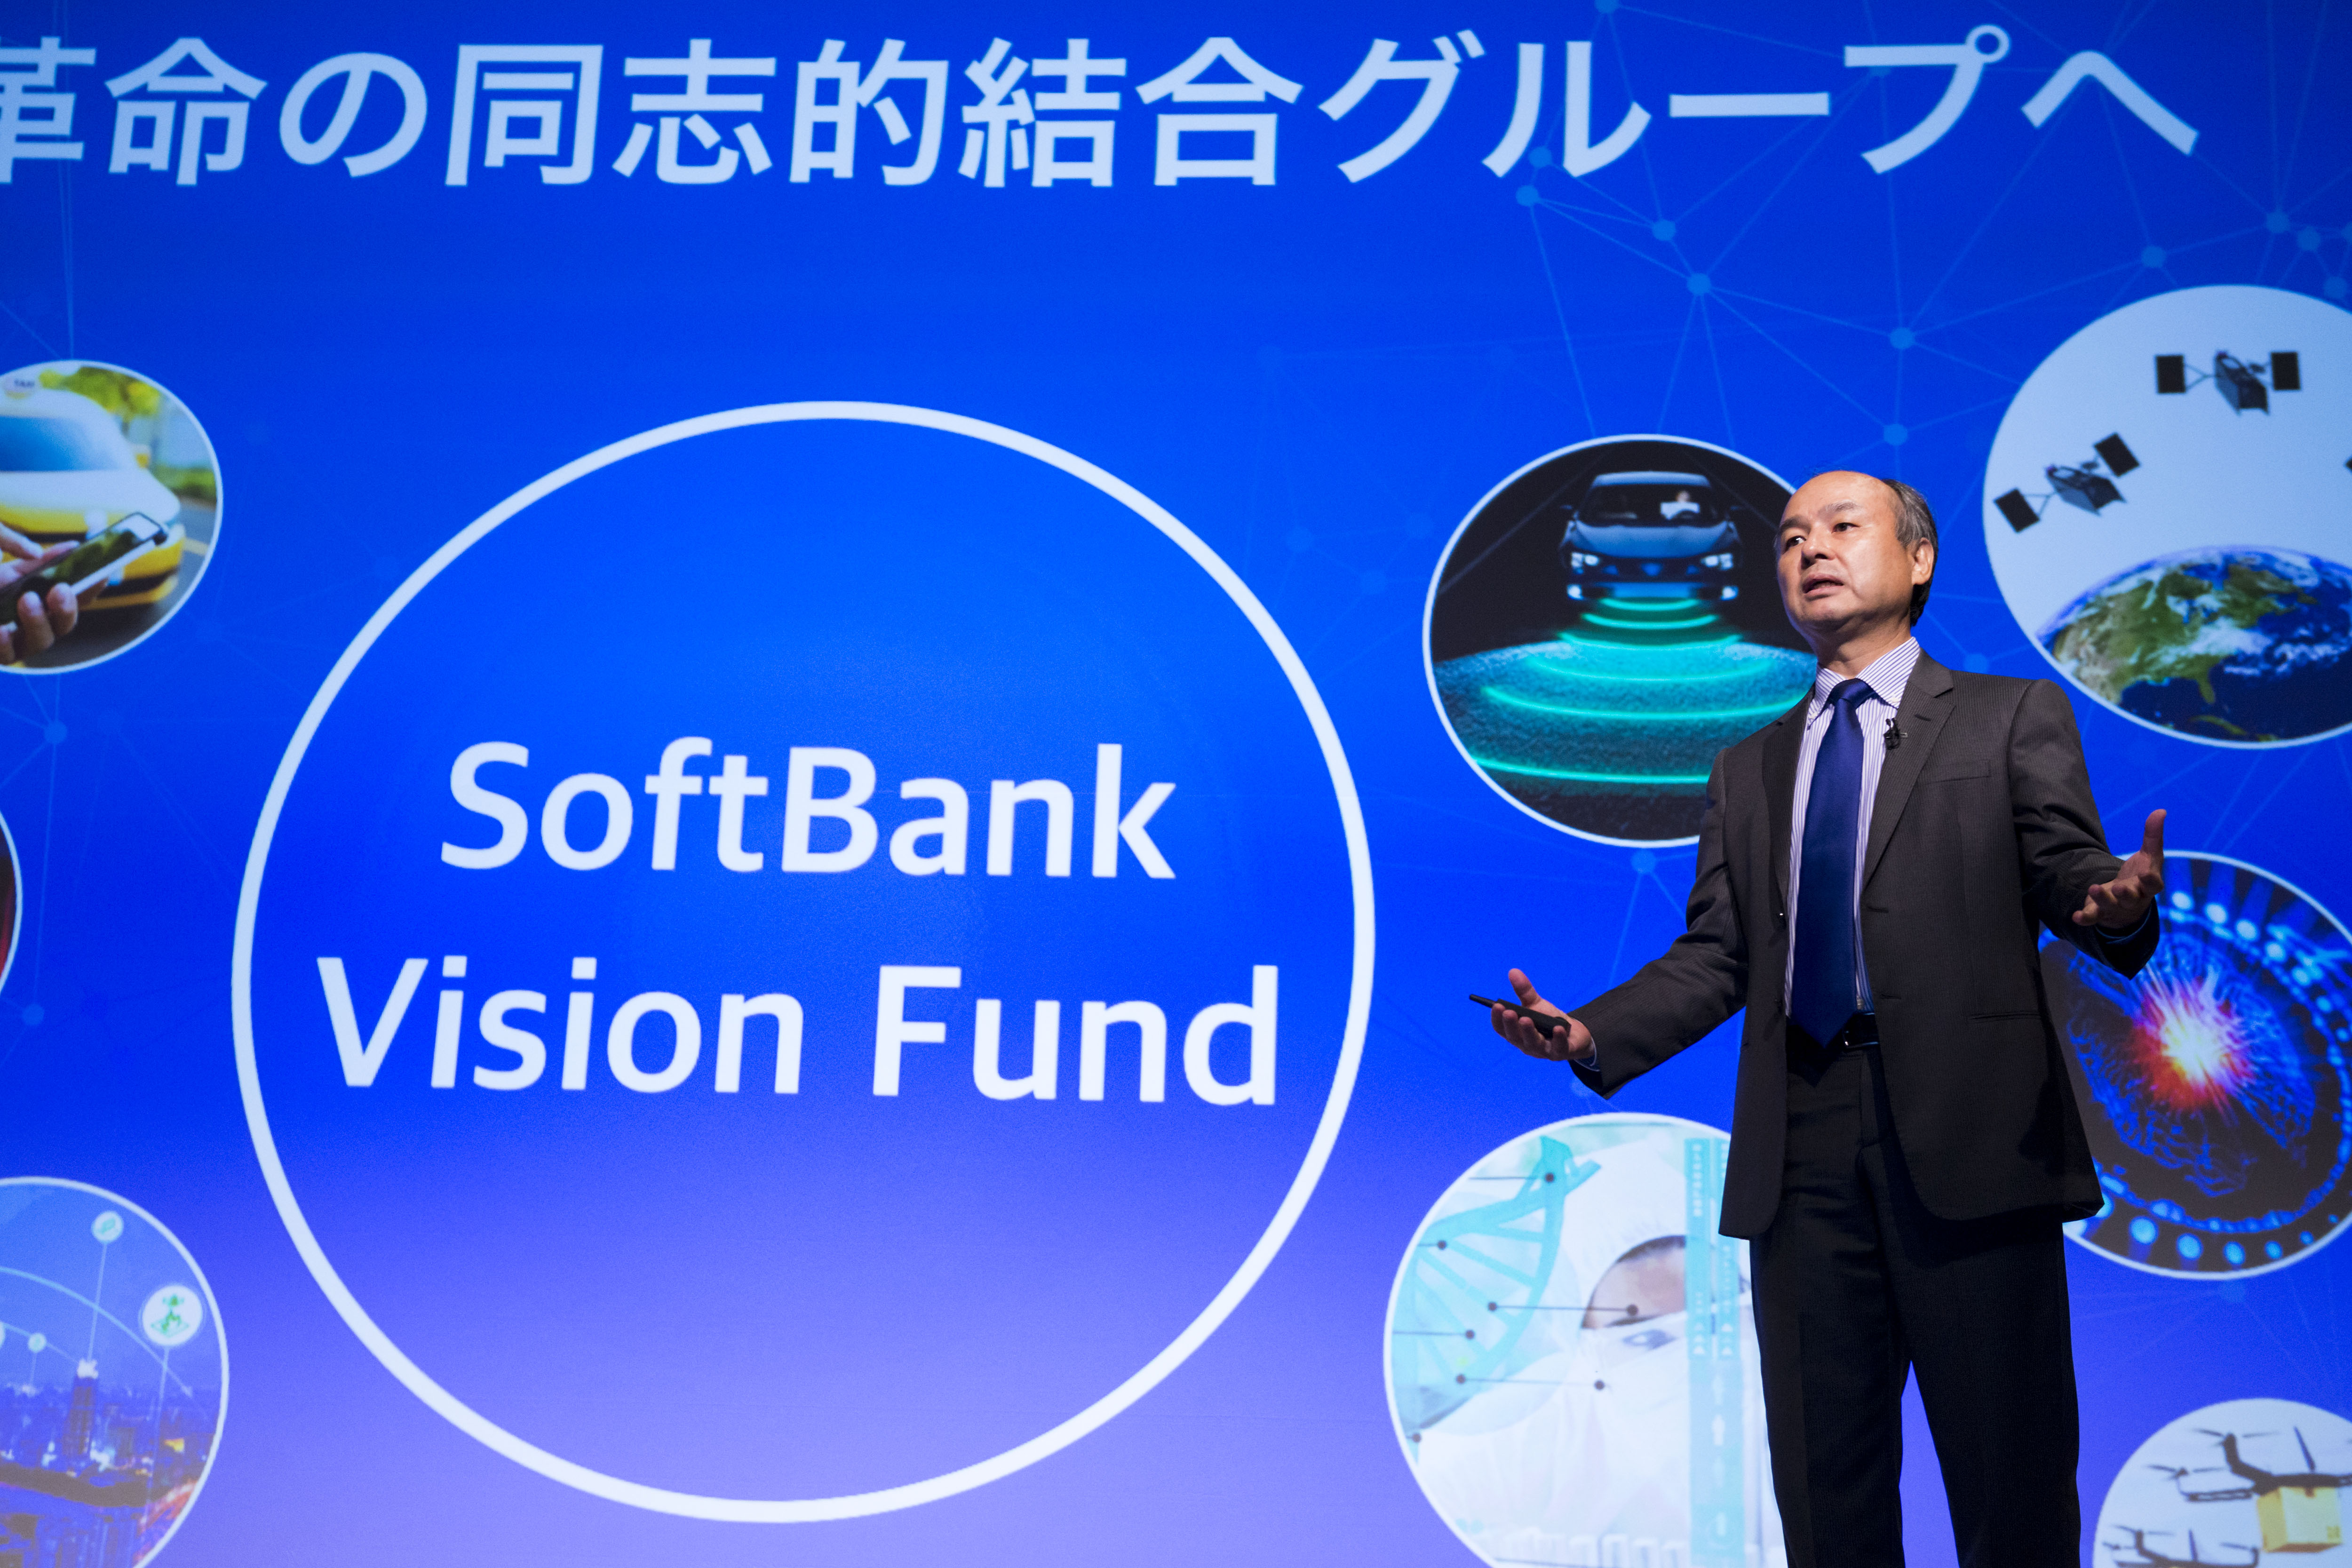 SoftBank Group CEO Masayoshi Son onstage in front of a backdrop in Japanese and English that reads “SoftBank Vision Fund.”